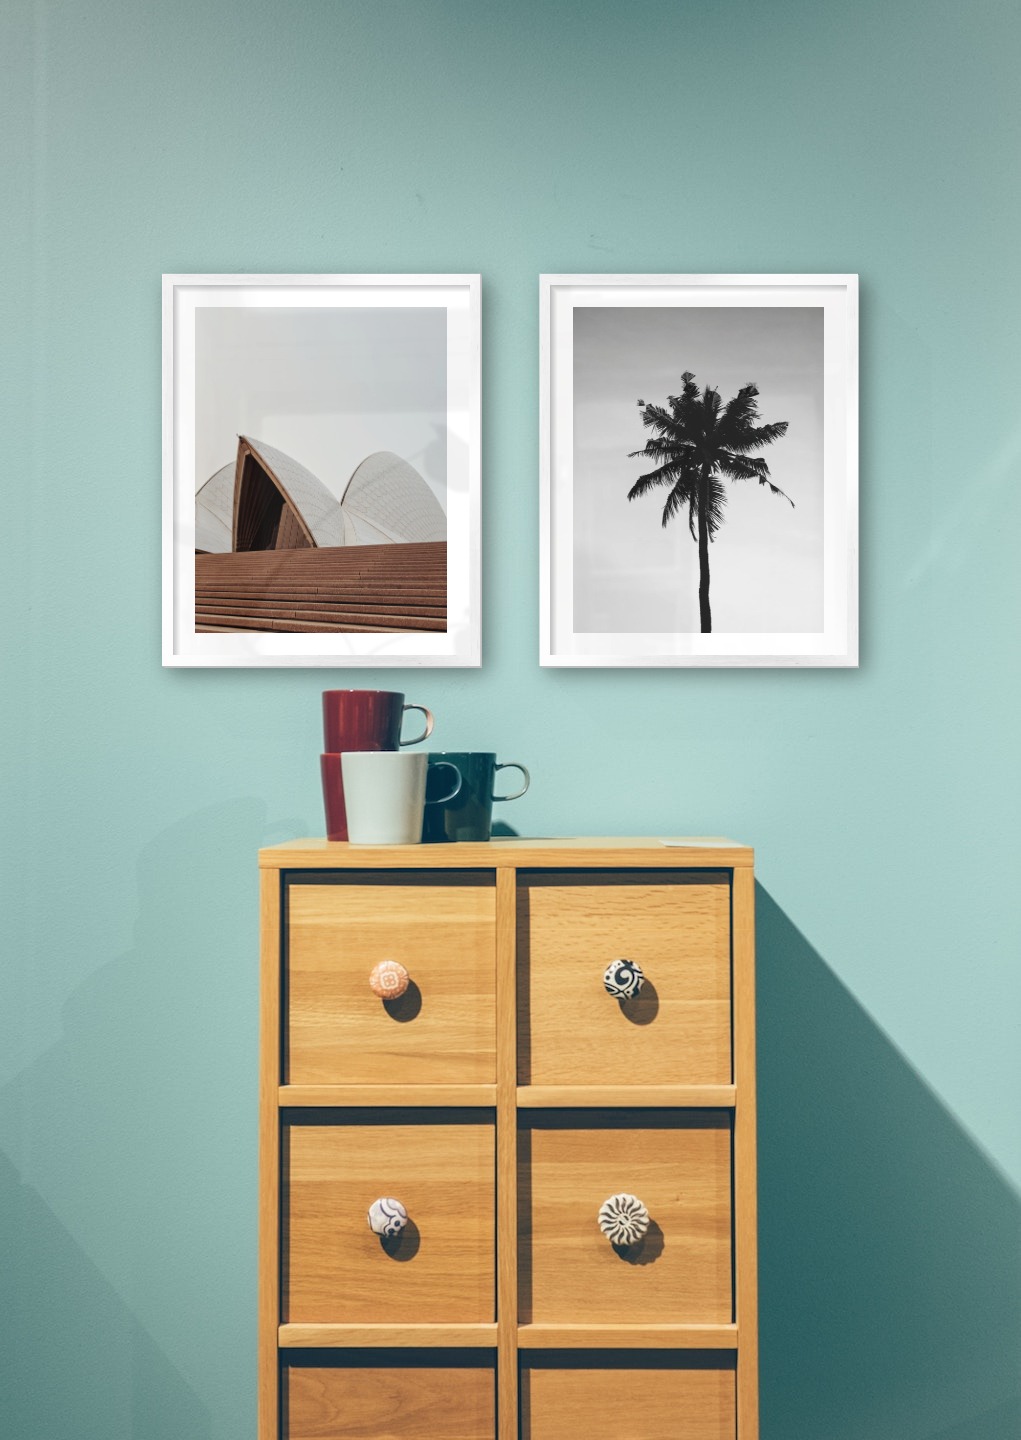 Gallery wall with picture frames in silver in sizes 40x50 with prints "Sydney Opera House" and "Palm"